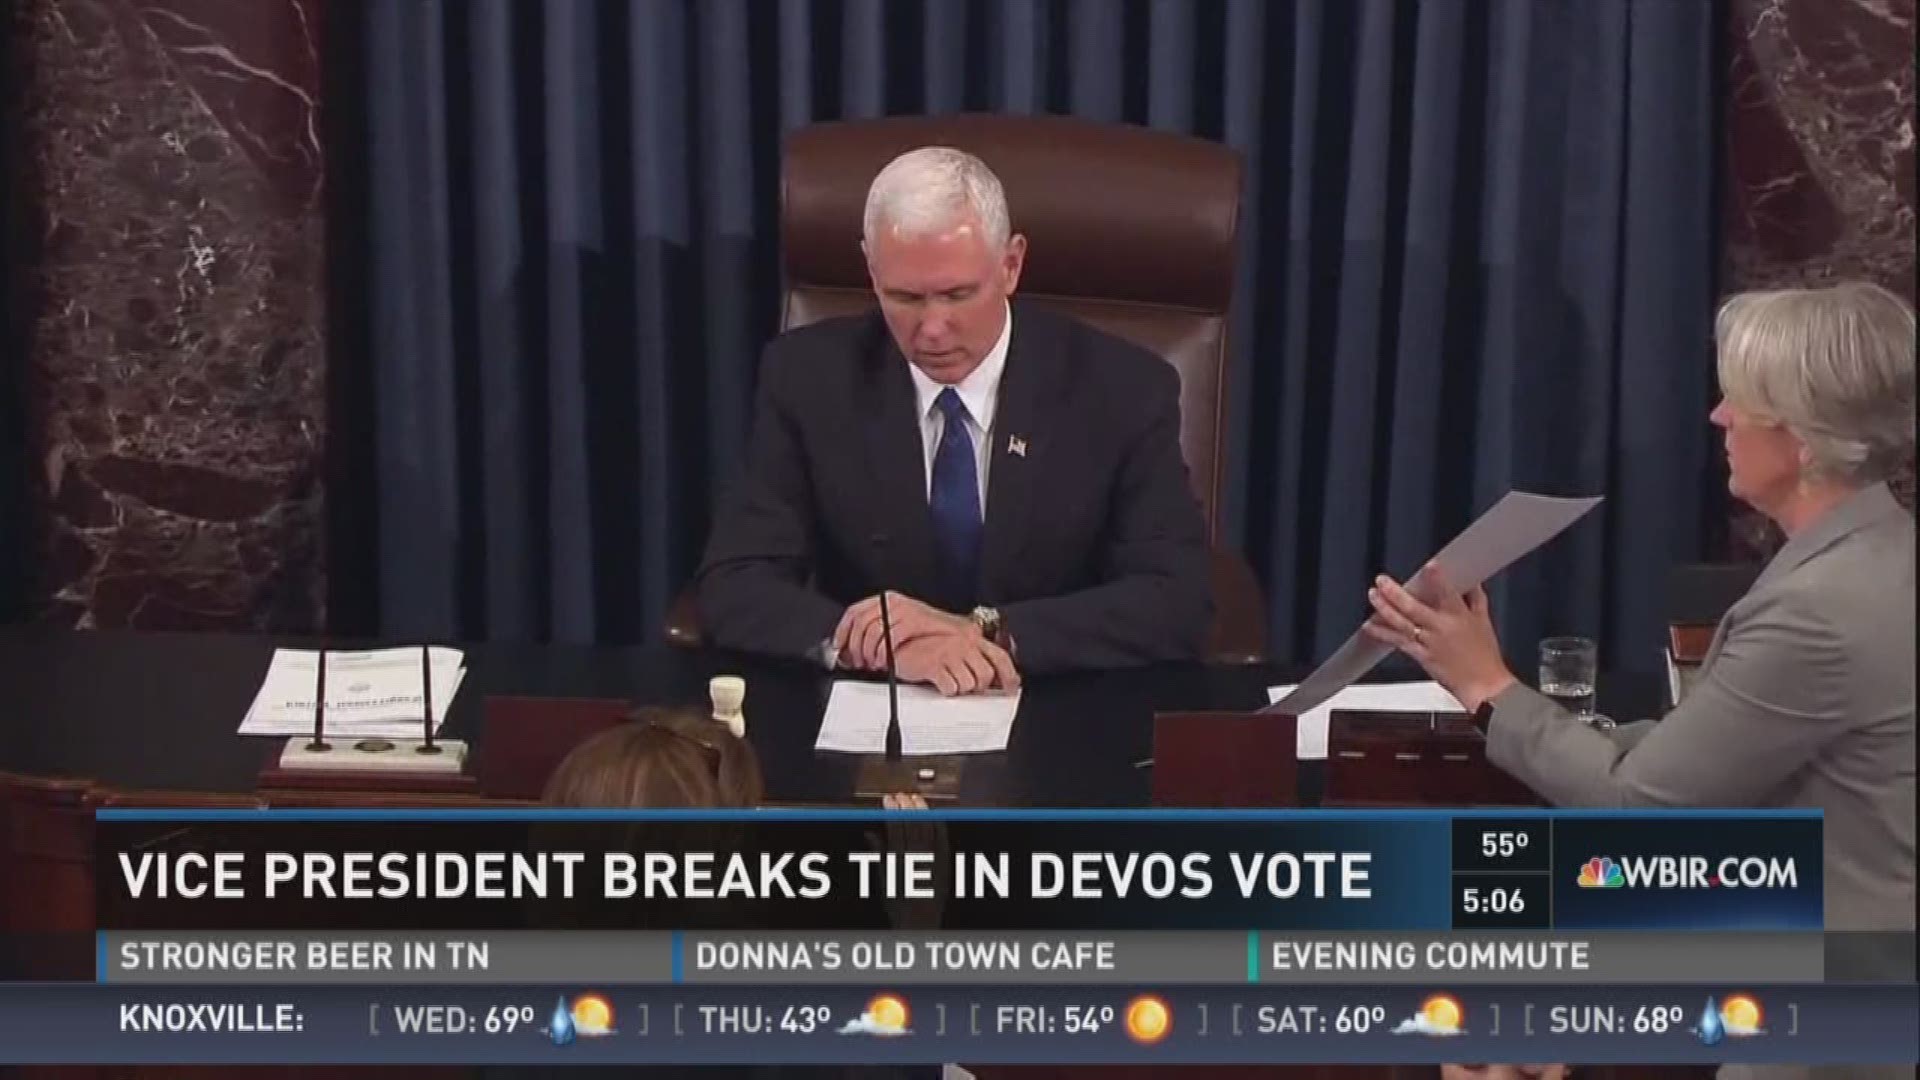 Feb. 7, 2017: Betsy DeVos has been confirmed at the U.S. Secretary of Education with a tie-breaking vote by Vice President Mike Pence. (NBC)